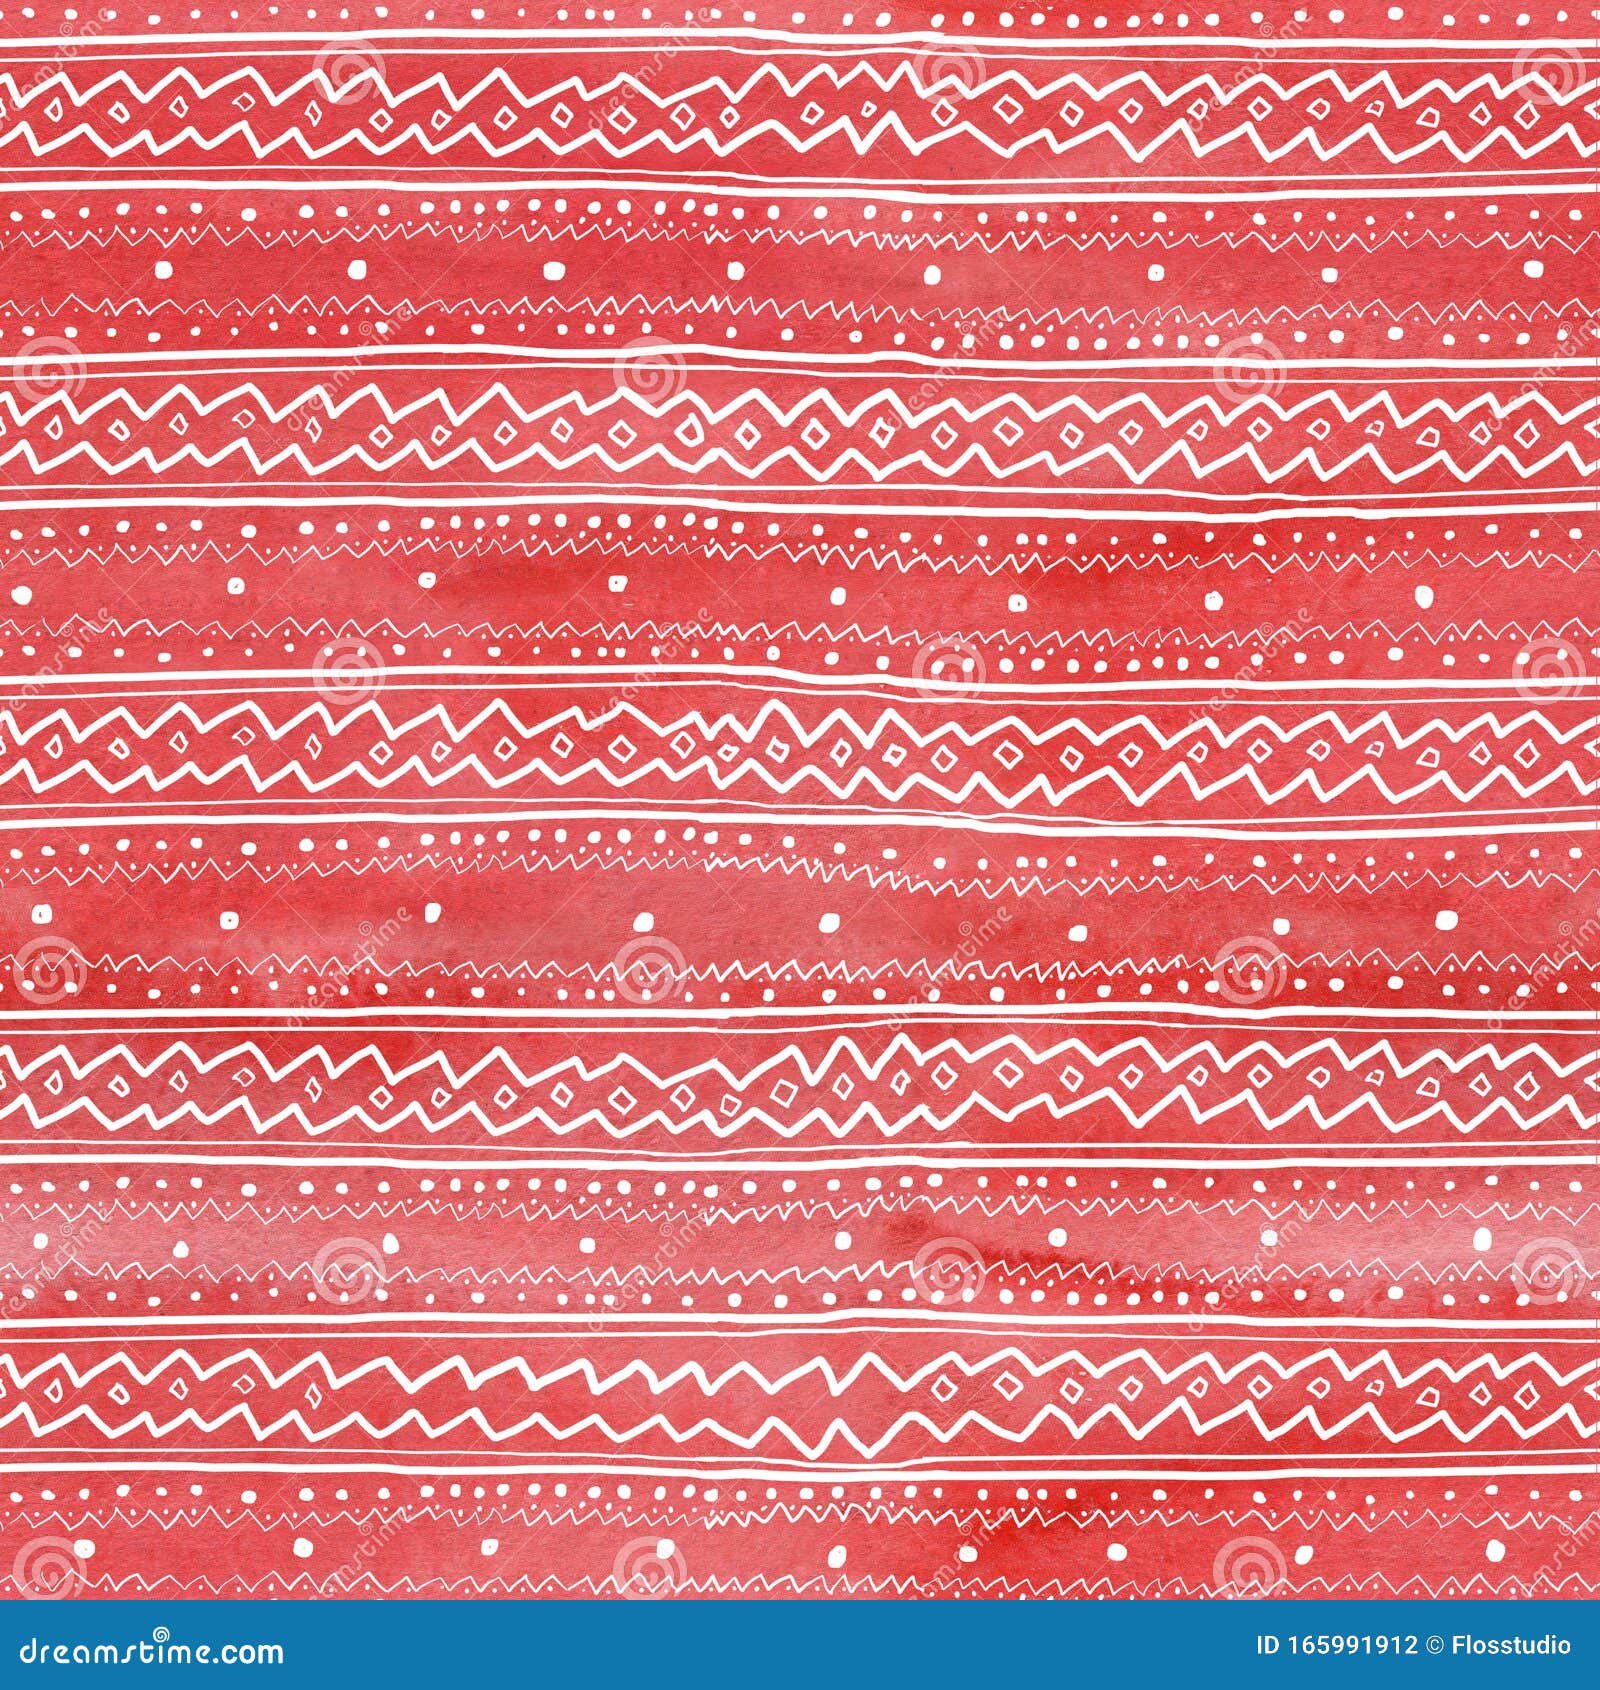 seamless watercolor christmas pattern background with white tracery on red watercolor background